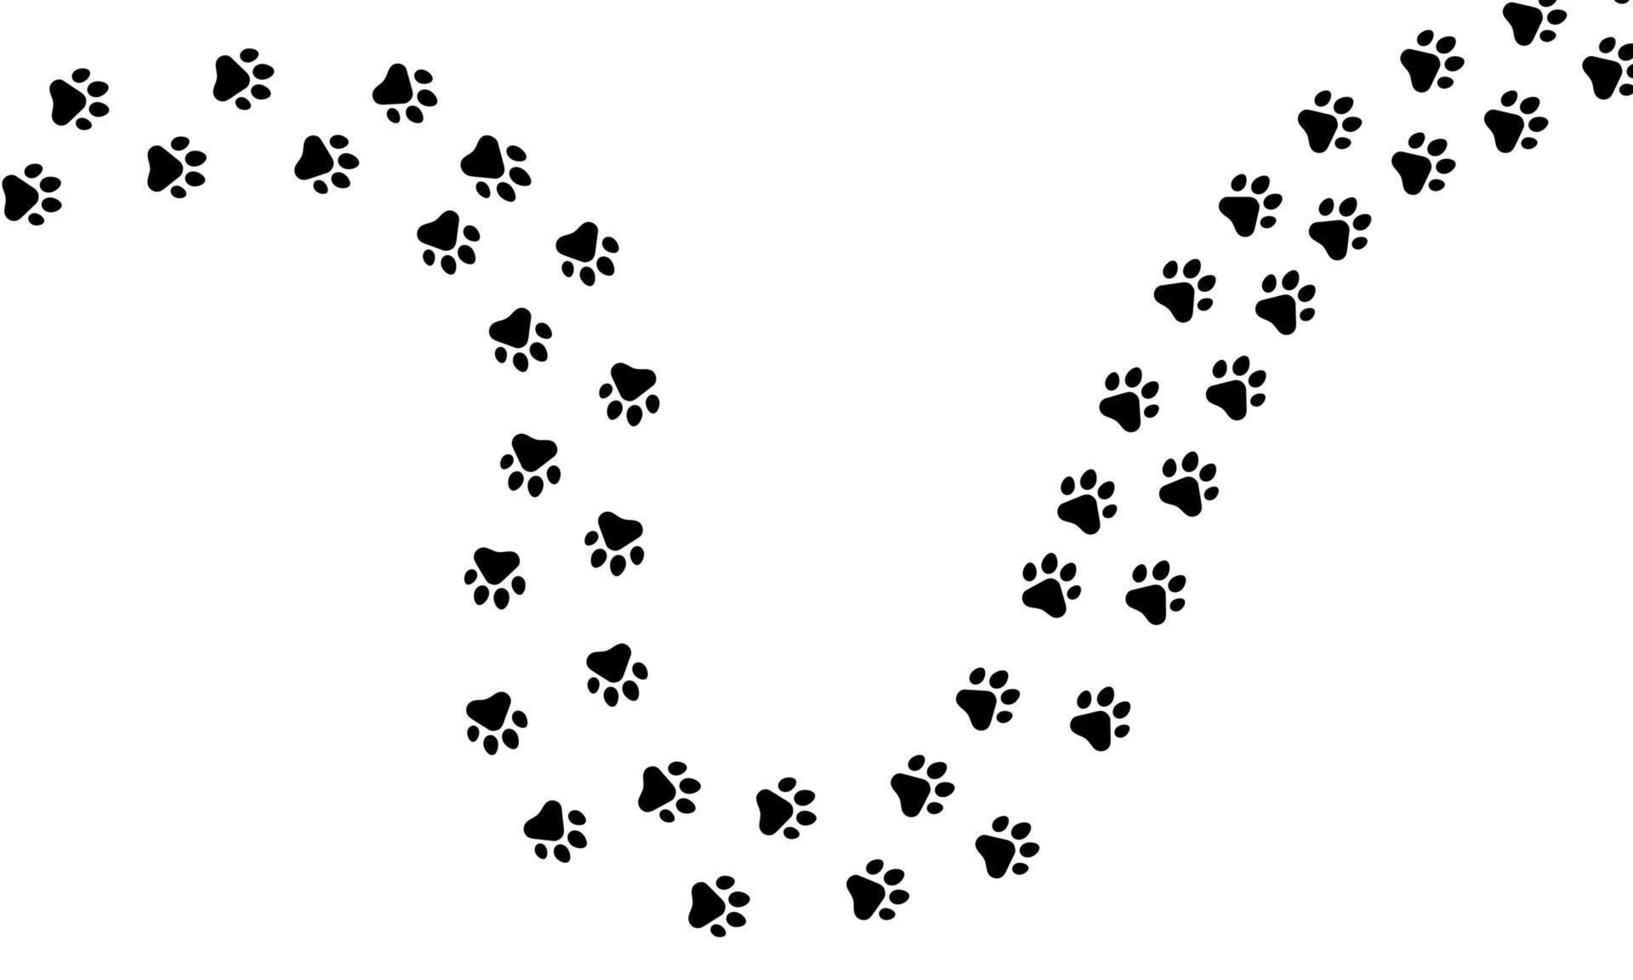 Paw trail of animal cat or dog print pattern footpath. Print paw walking wildlife mark isolated white. Vector cartoon dirt footprint illustration trail silhouette cat or dog. Track step foot pet trace